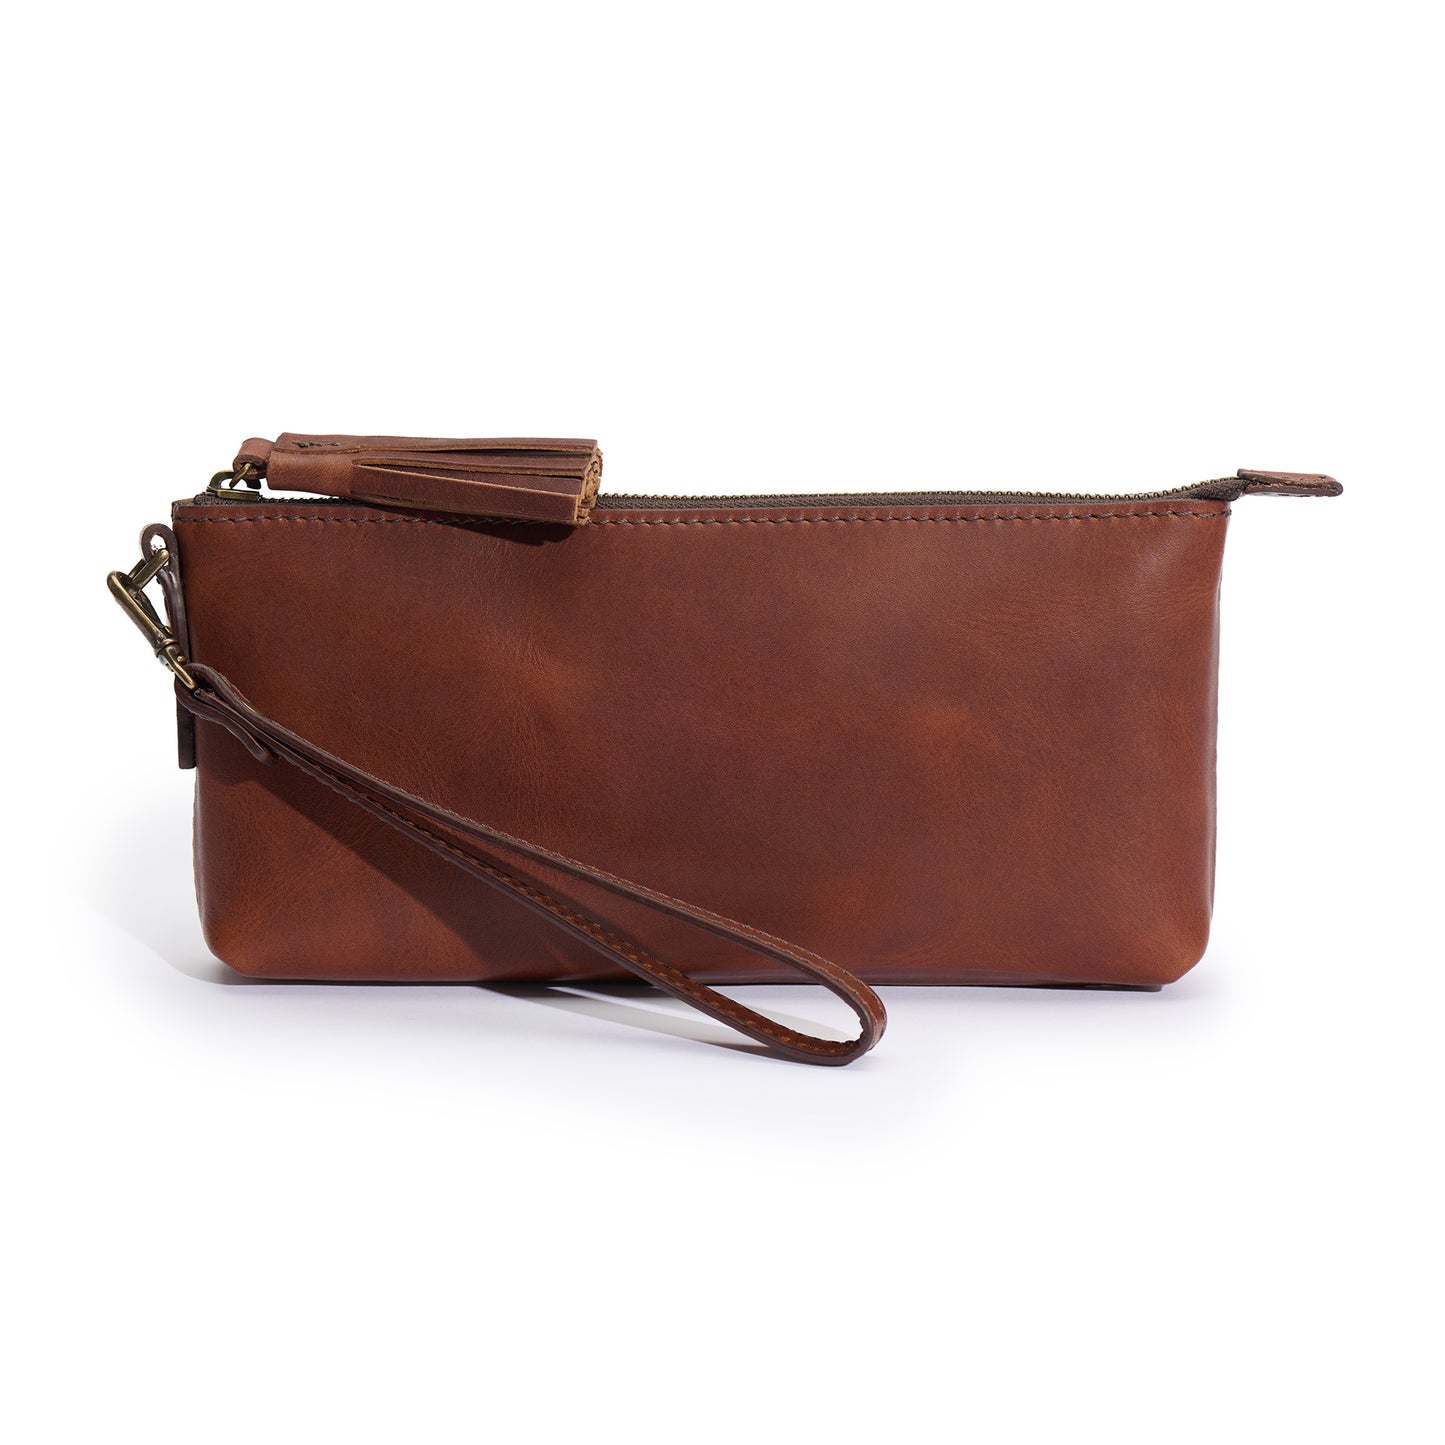 broadway wristlet made of full grain leather by Jackson Wayne in Vintage Brown color leather